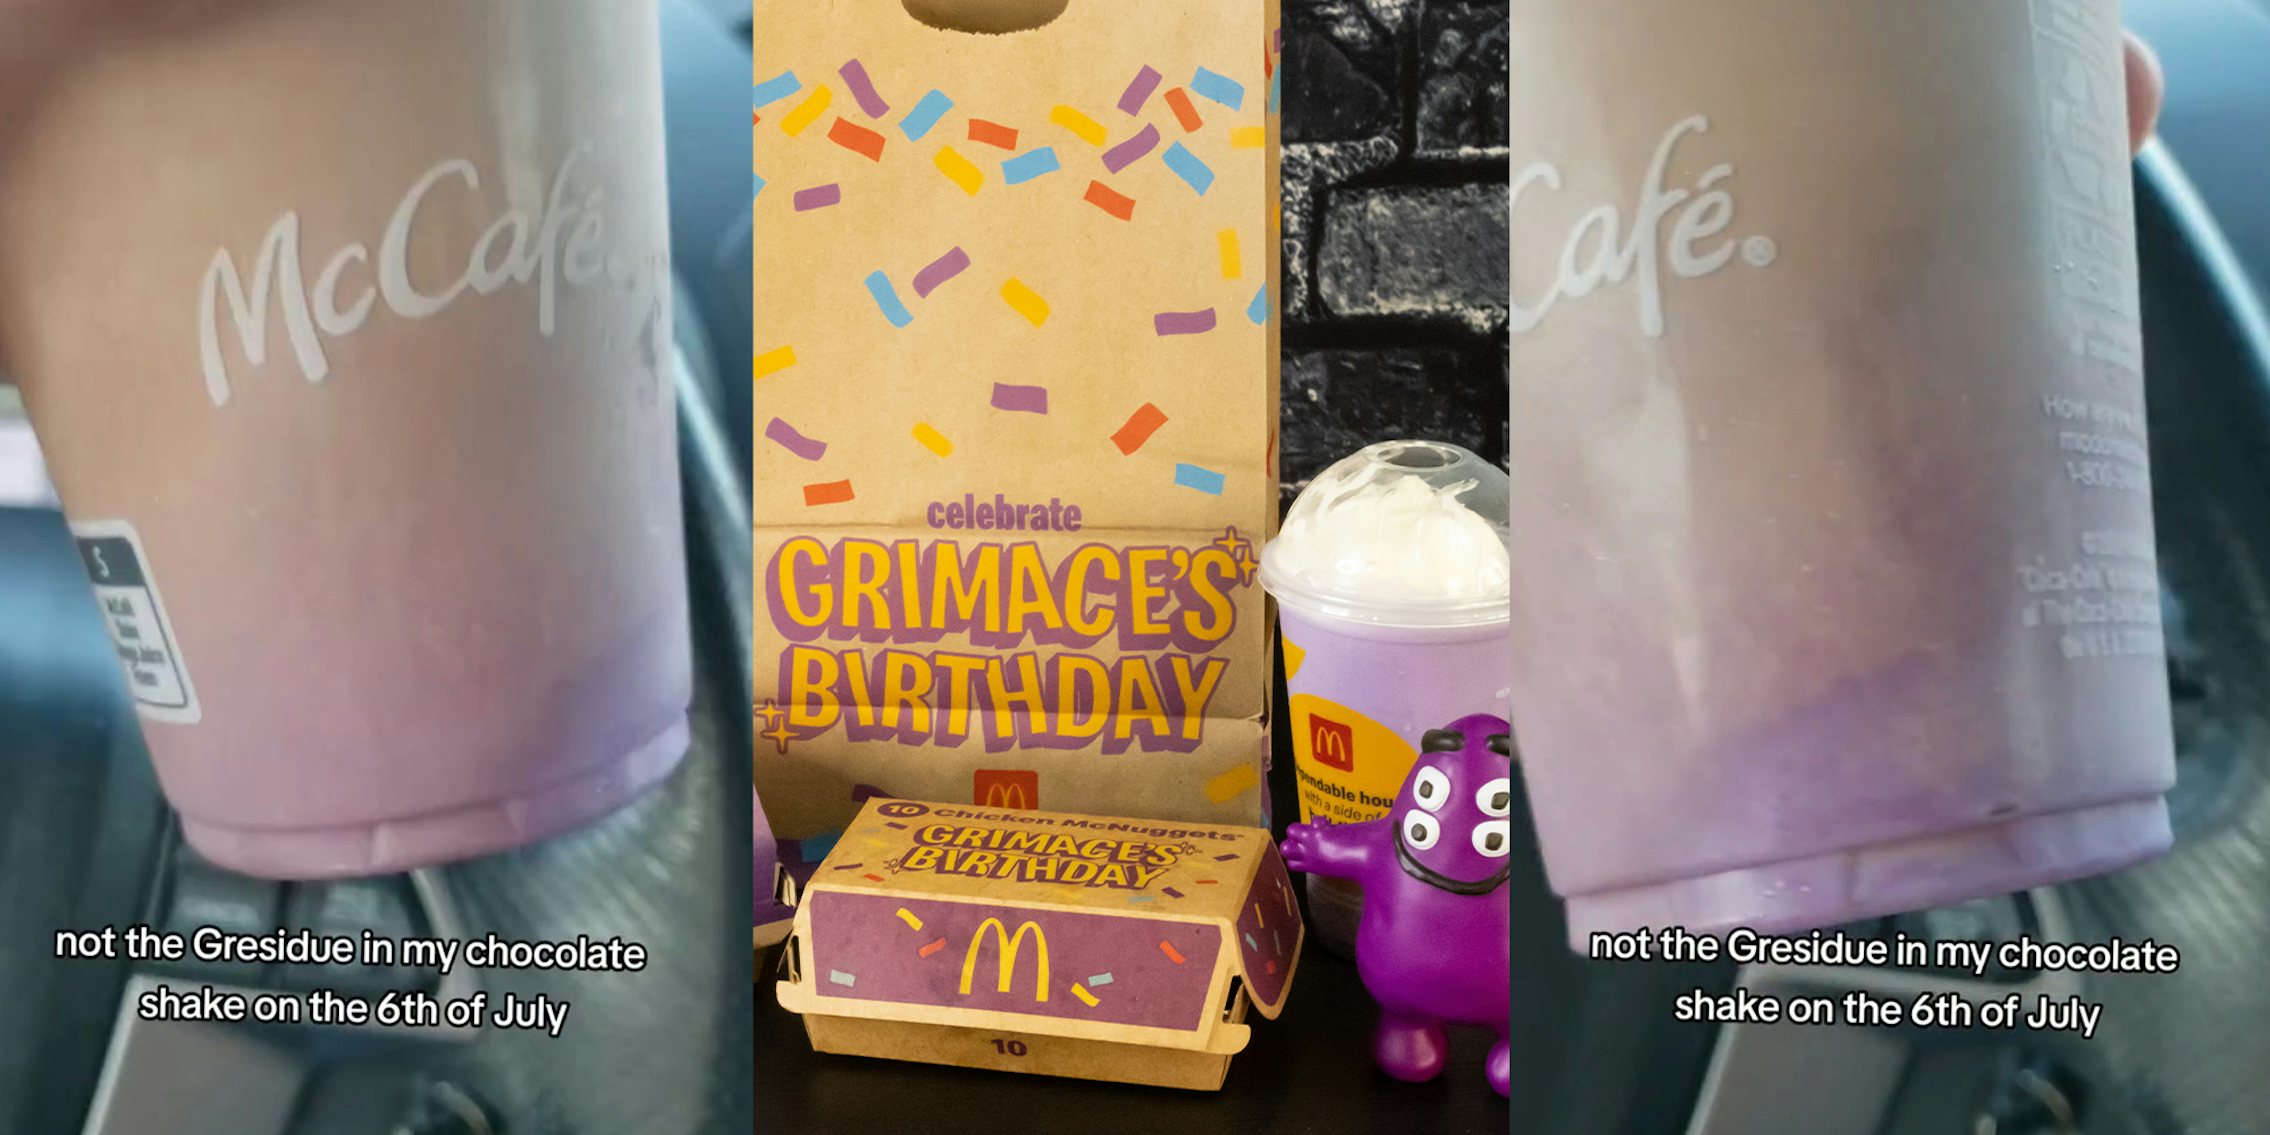 Grimace Birthday Special at McDonalds